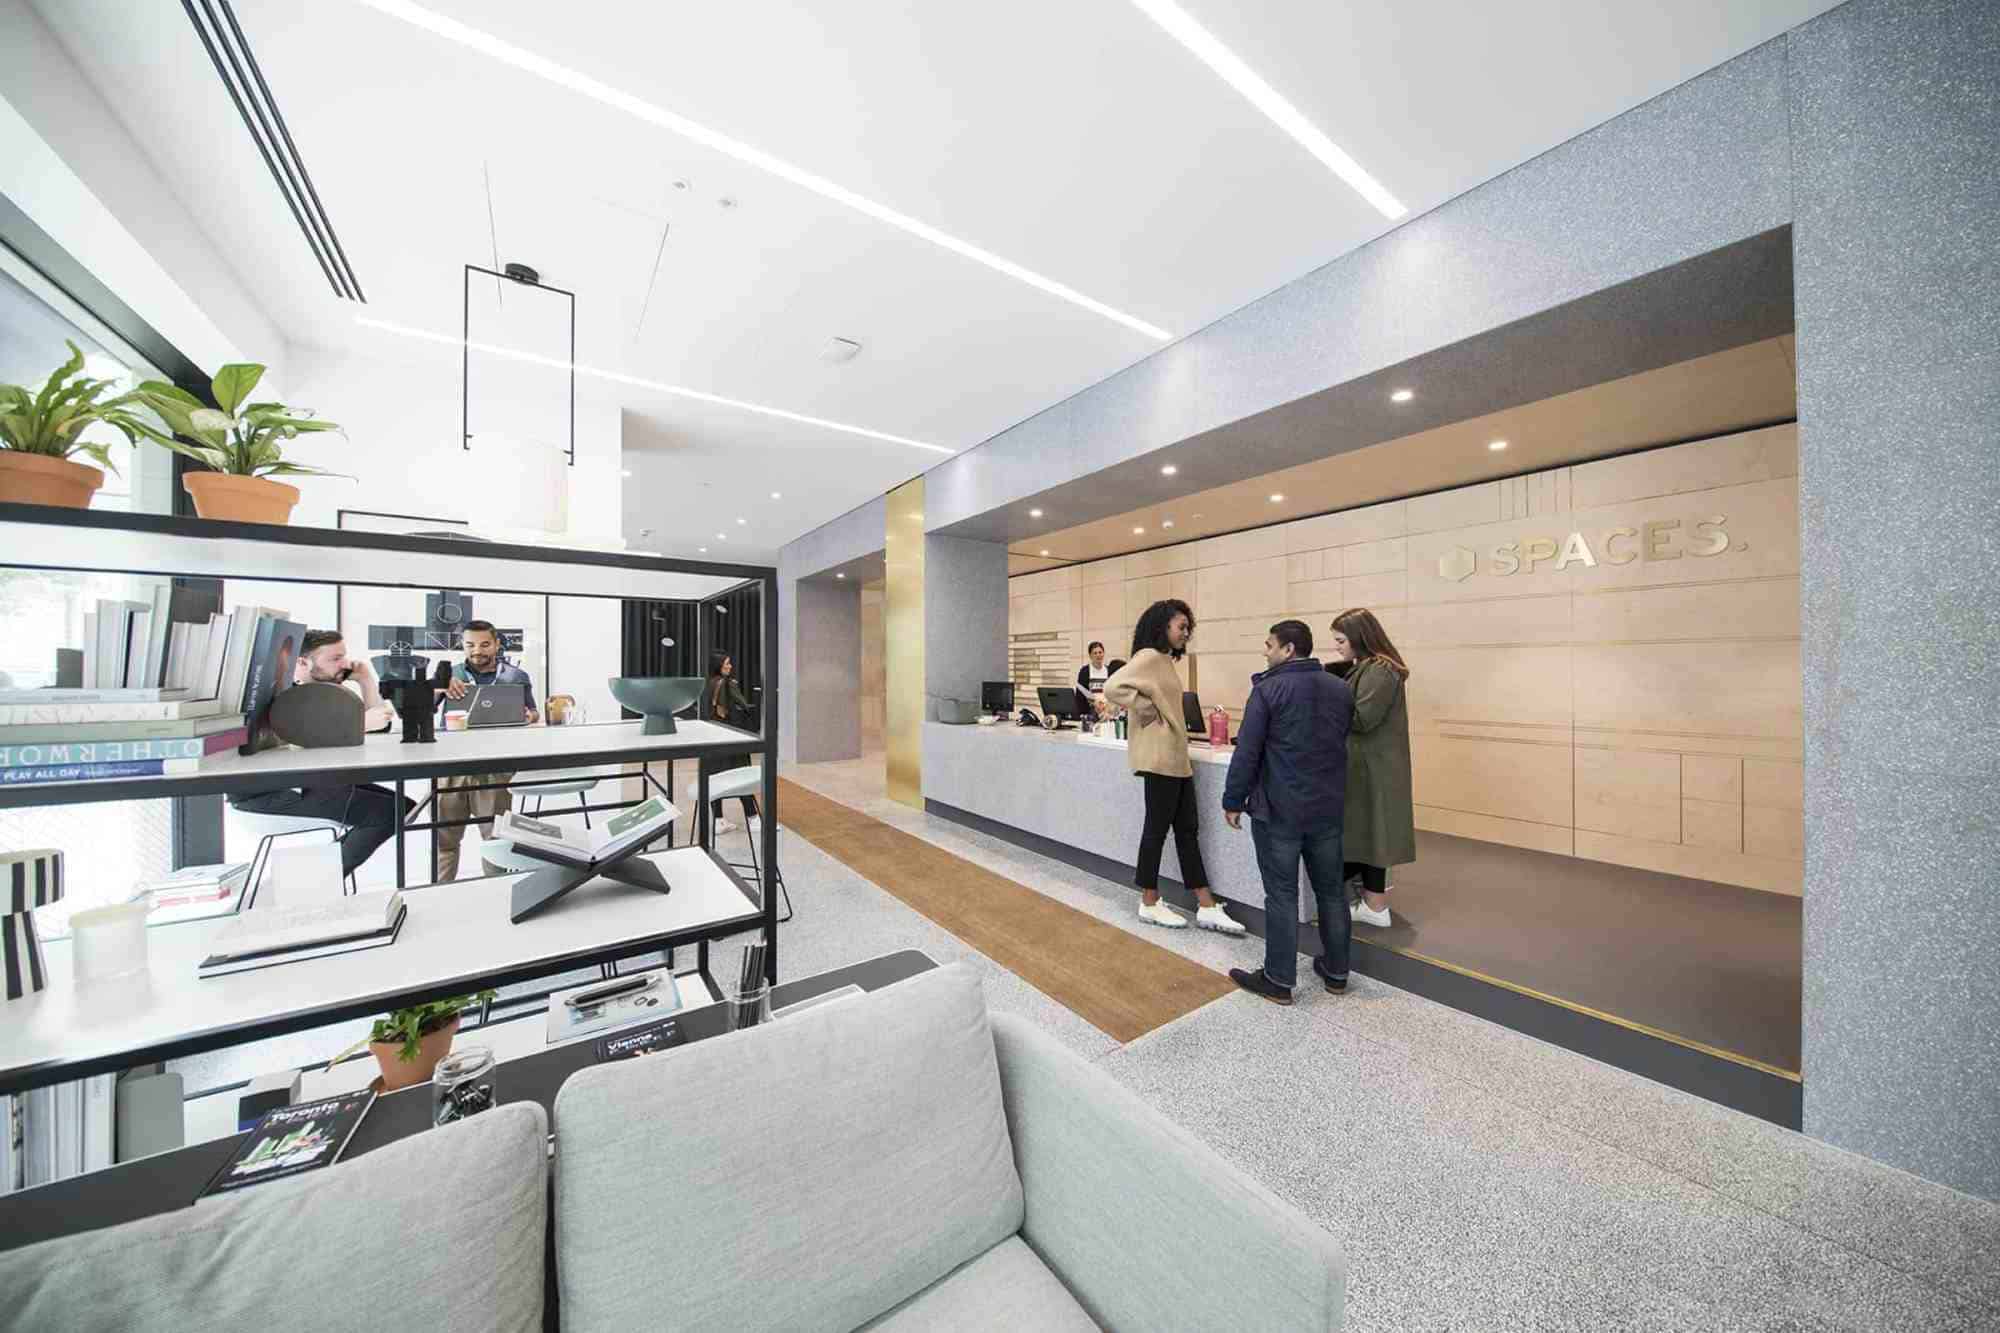 office fit out london